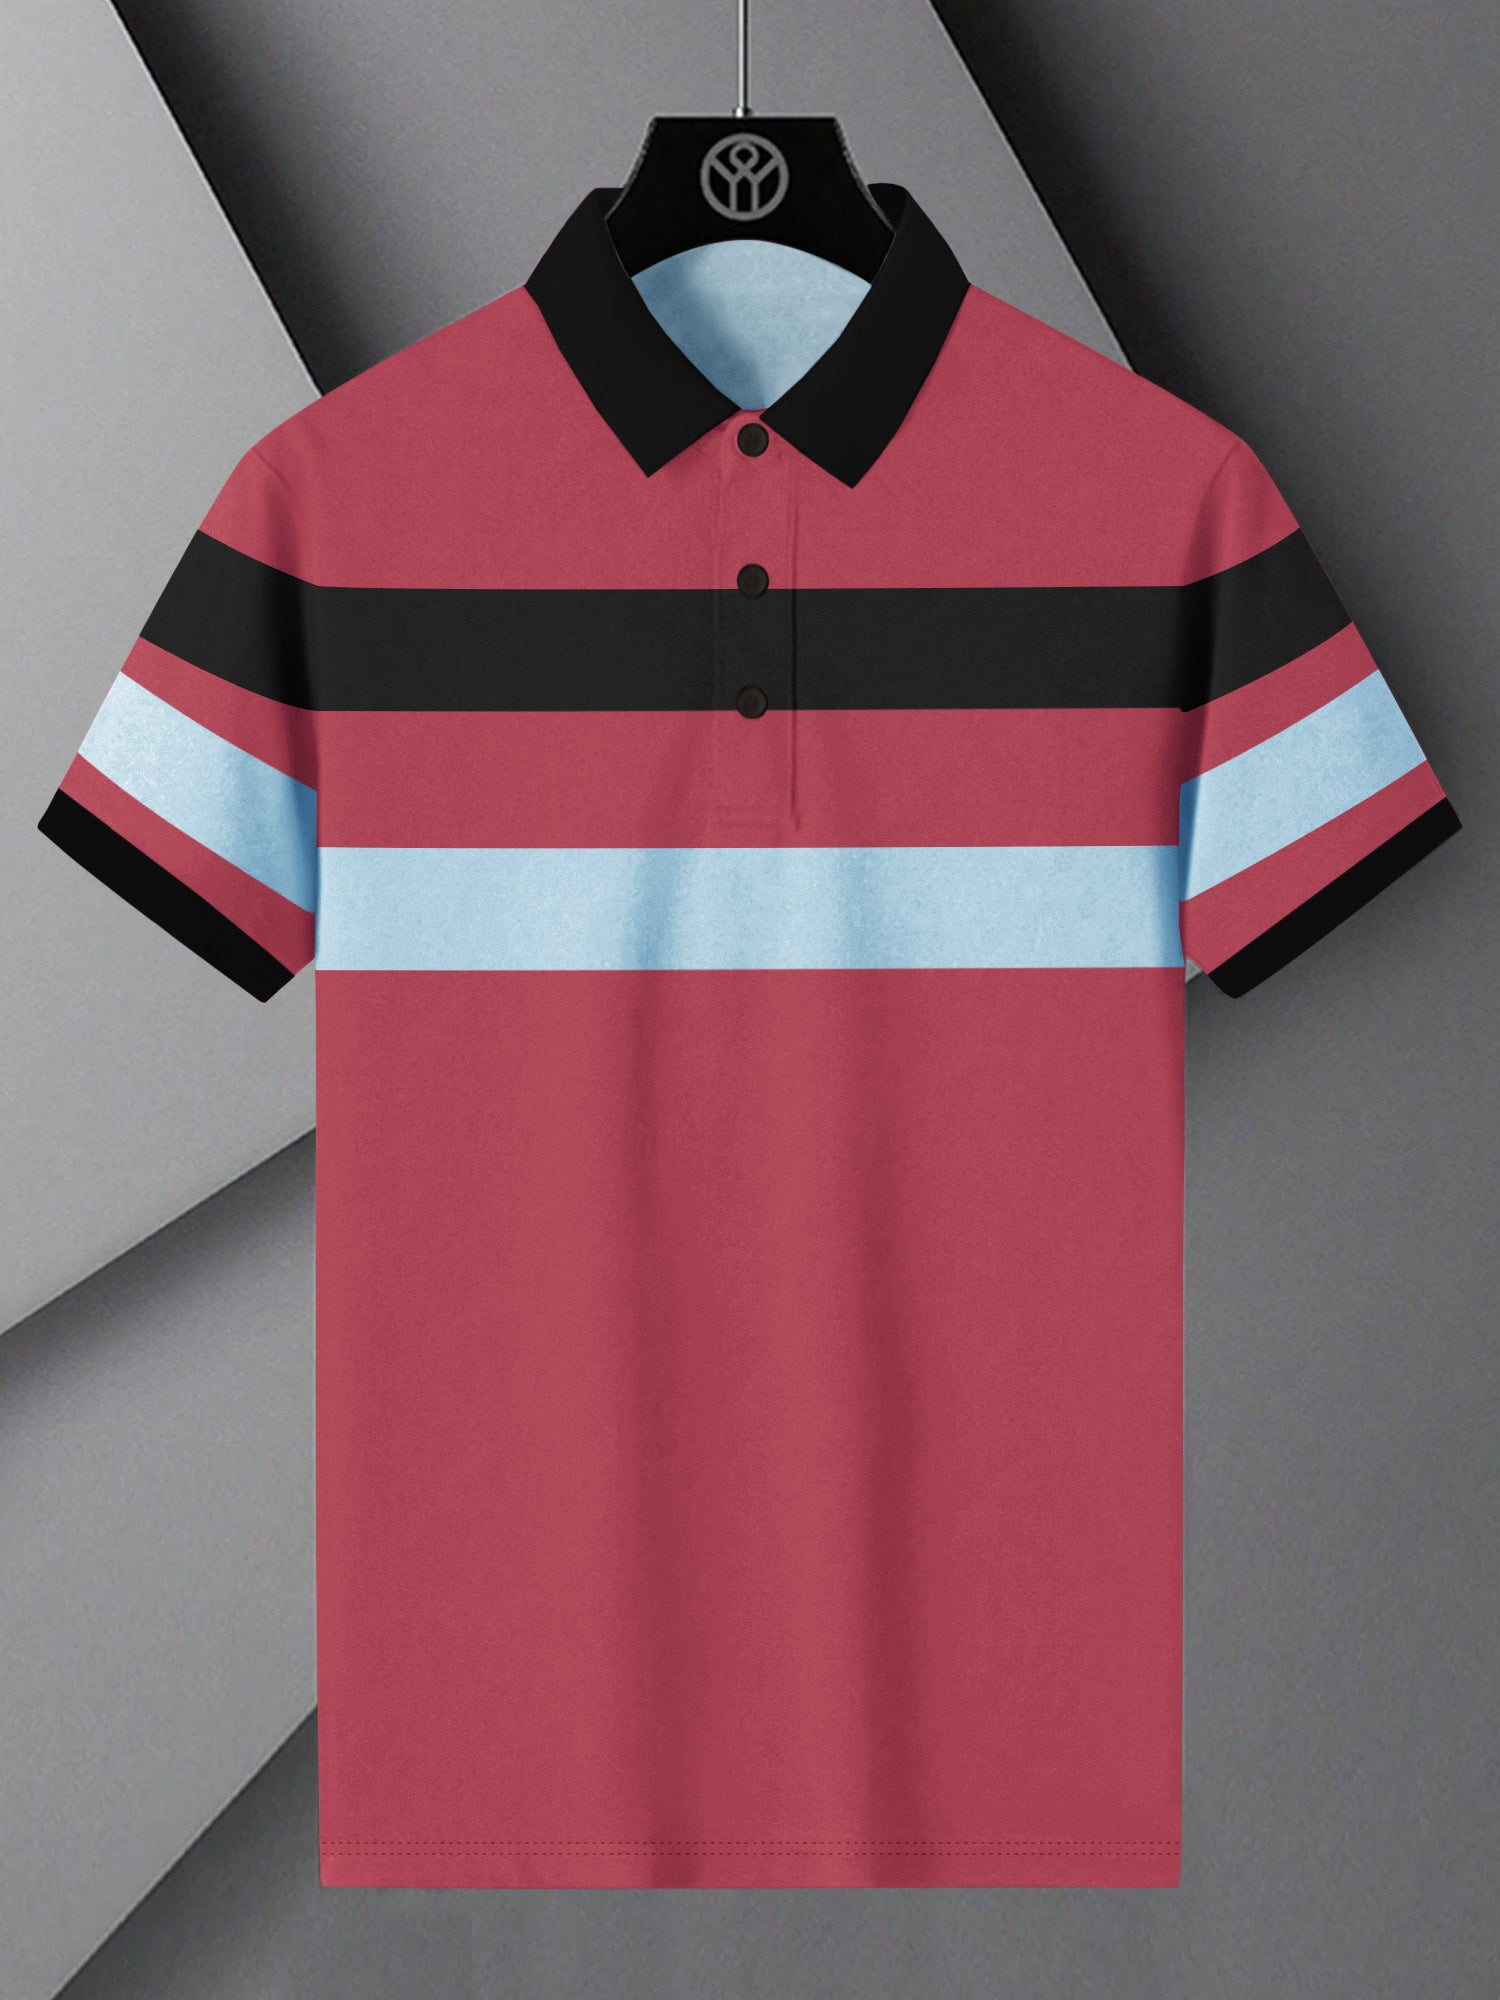 NXT Summer Polo Shirt For Men-Pink with Sky & Black-BE806/BR13048